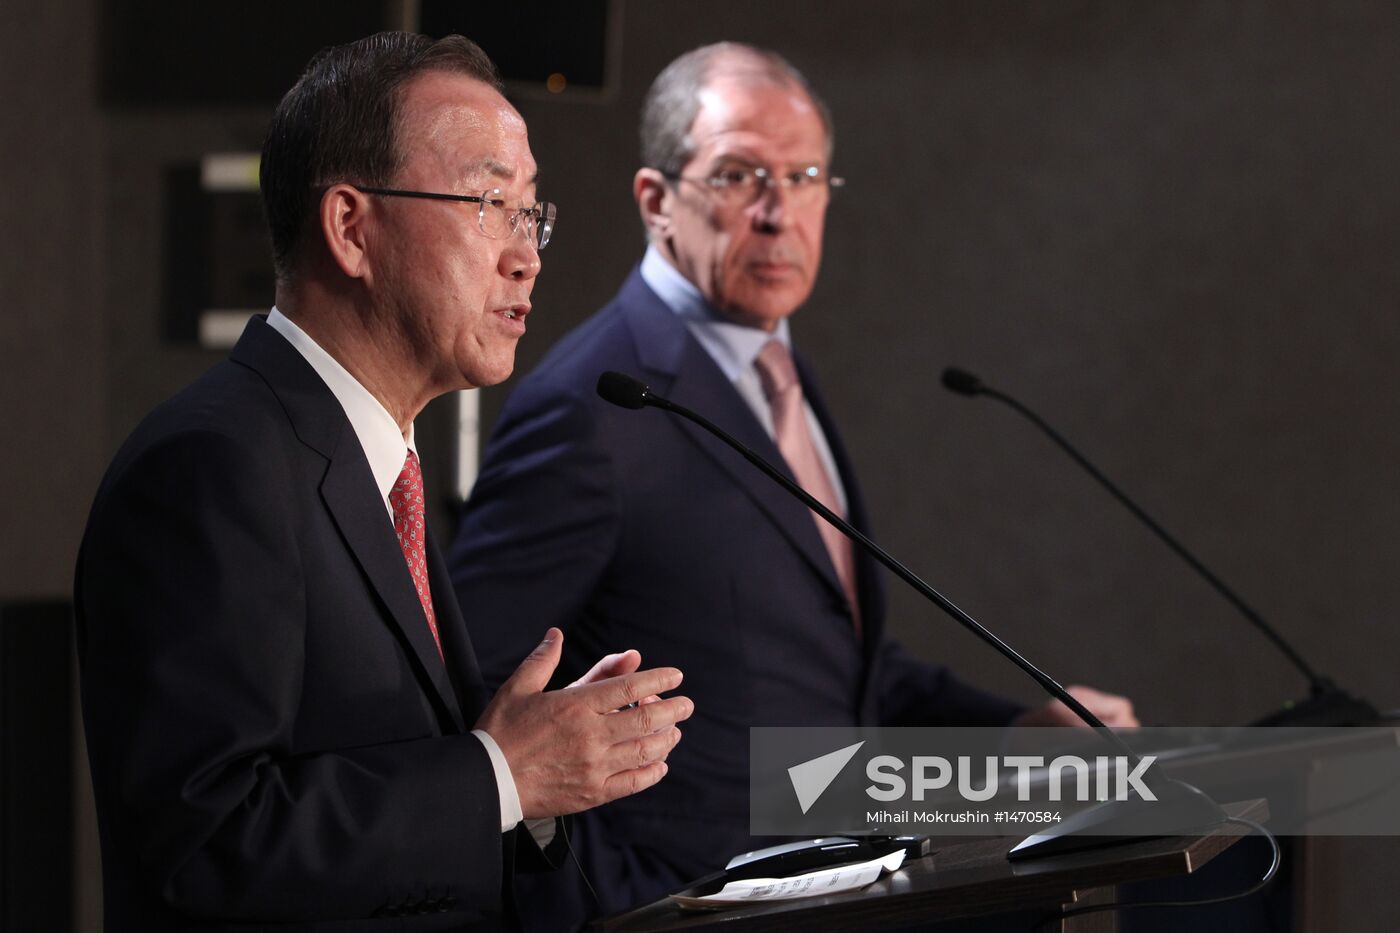 News conference by Ban Ki-moon and Sergey Lavrov